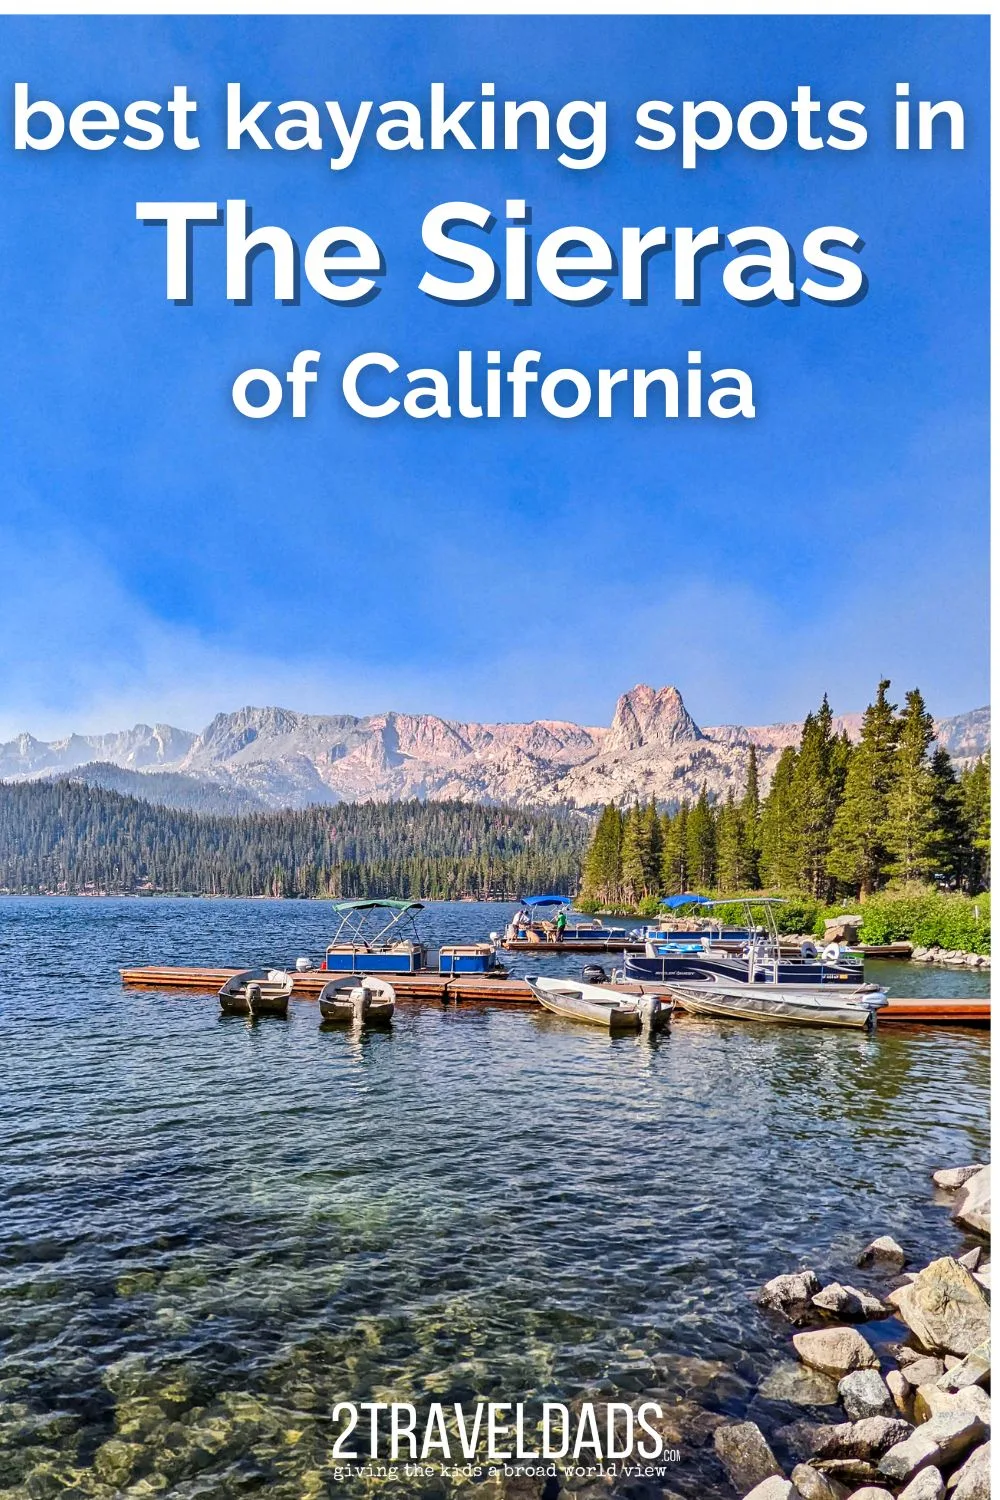 Kayaking in California's Sierras is a gorgeous and wild experience. From paddling on the Merced River out of Yosemite National Park to the crystal blue waters of Lake Tahoe, 15+ spots for kayaking and SUP in the Sierras.